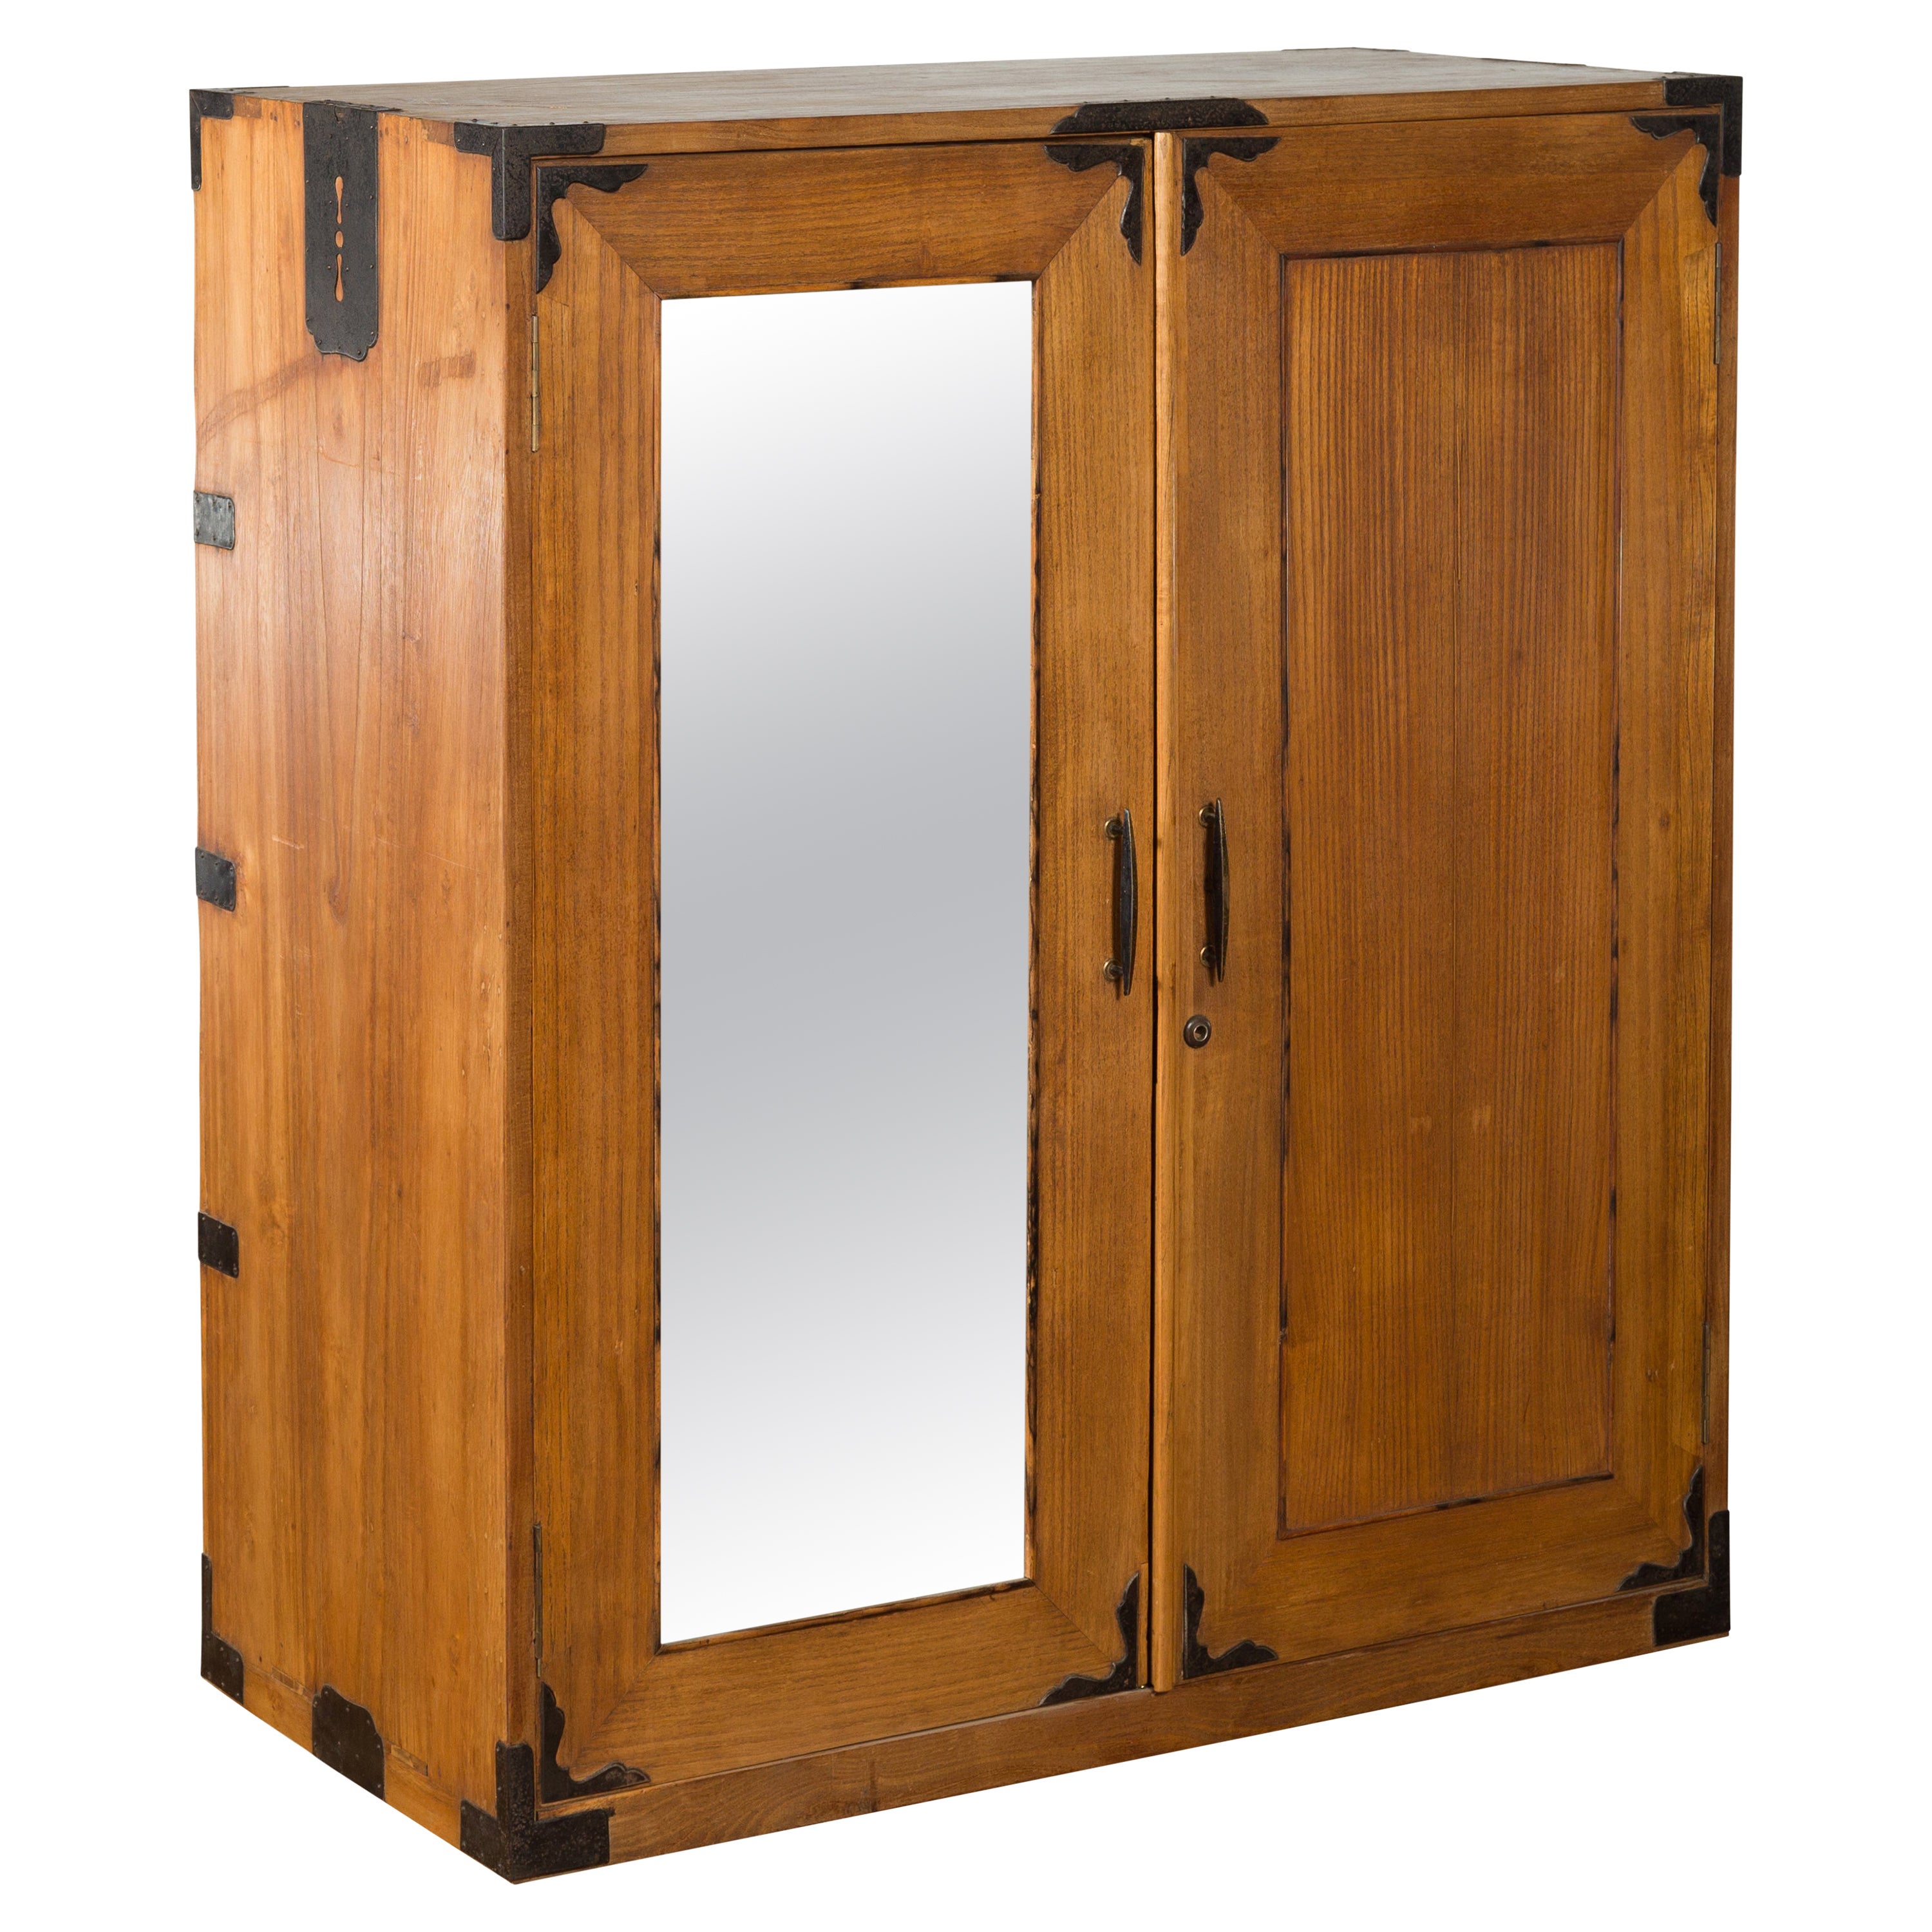 Japanese Early 20th Century Wooden Tansu Clothing Cabinet with Mirrored Door For Sale